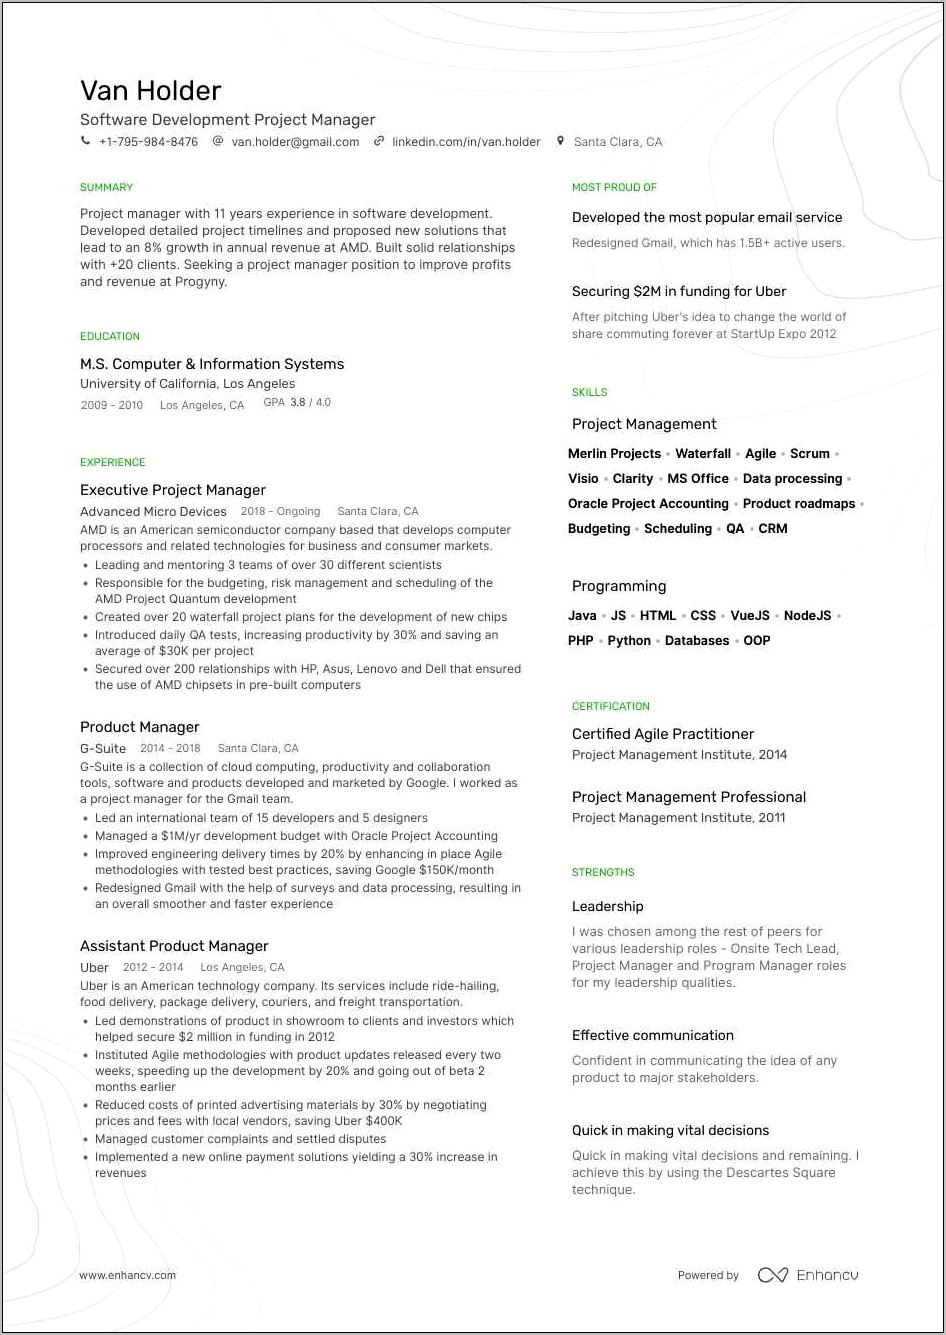 Skill Examples For Project Supervisor Resume